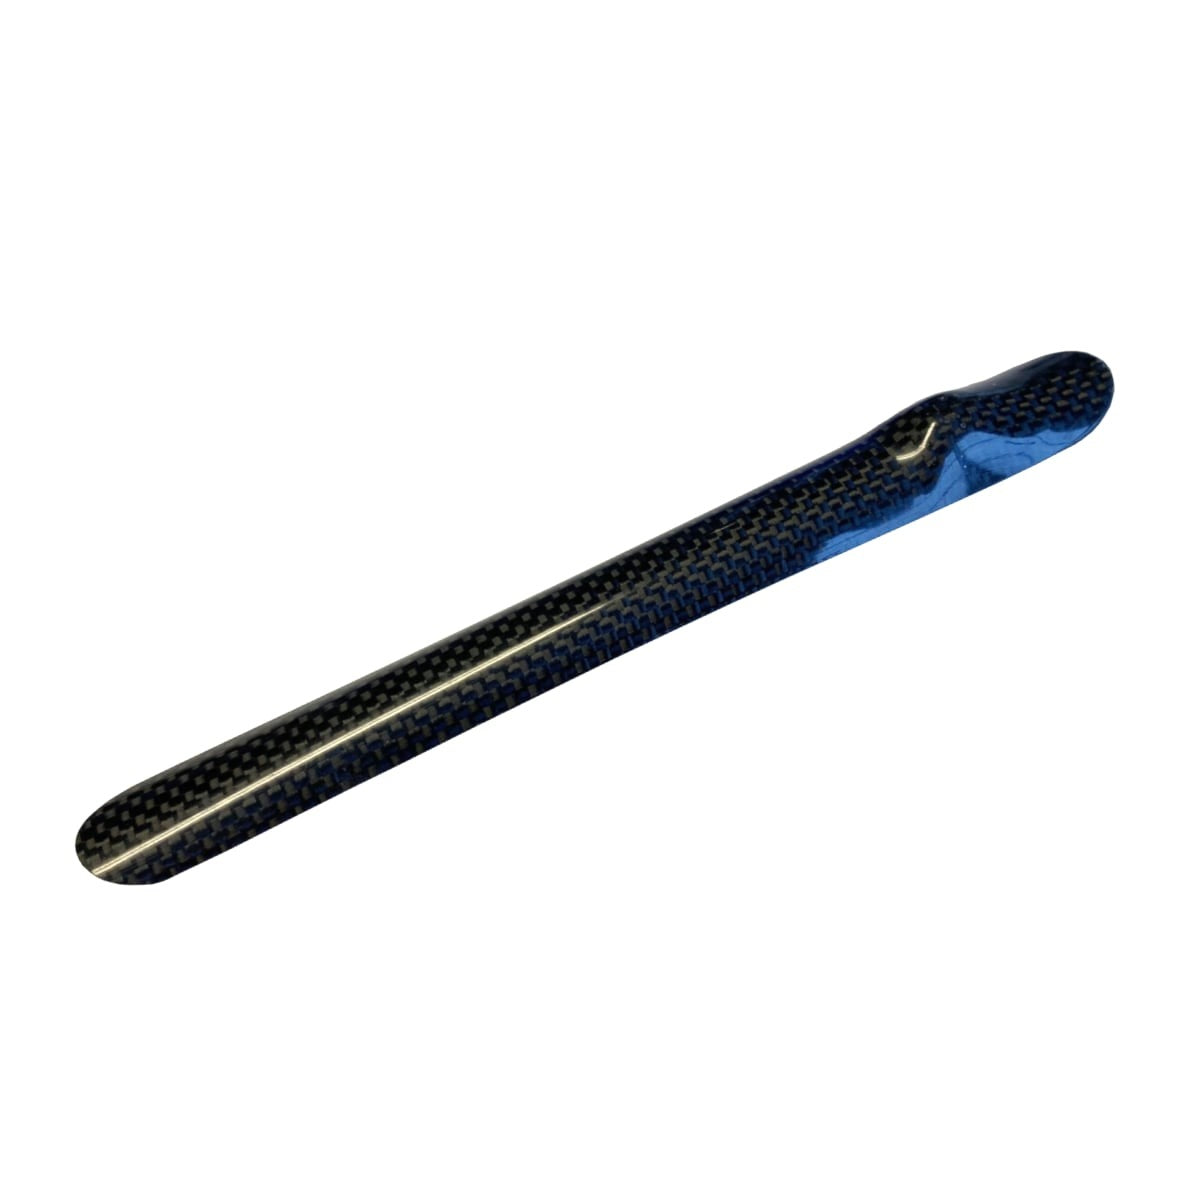 Carbon Paddle Grip oval